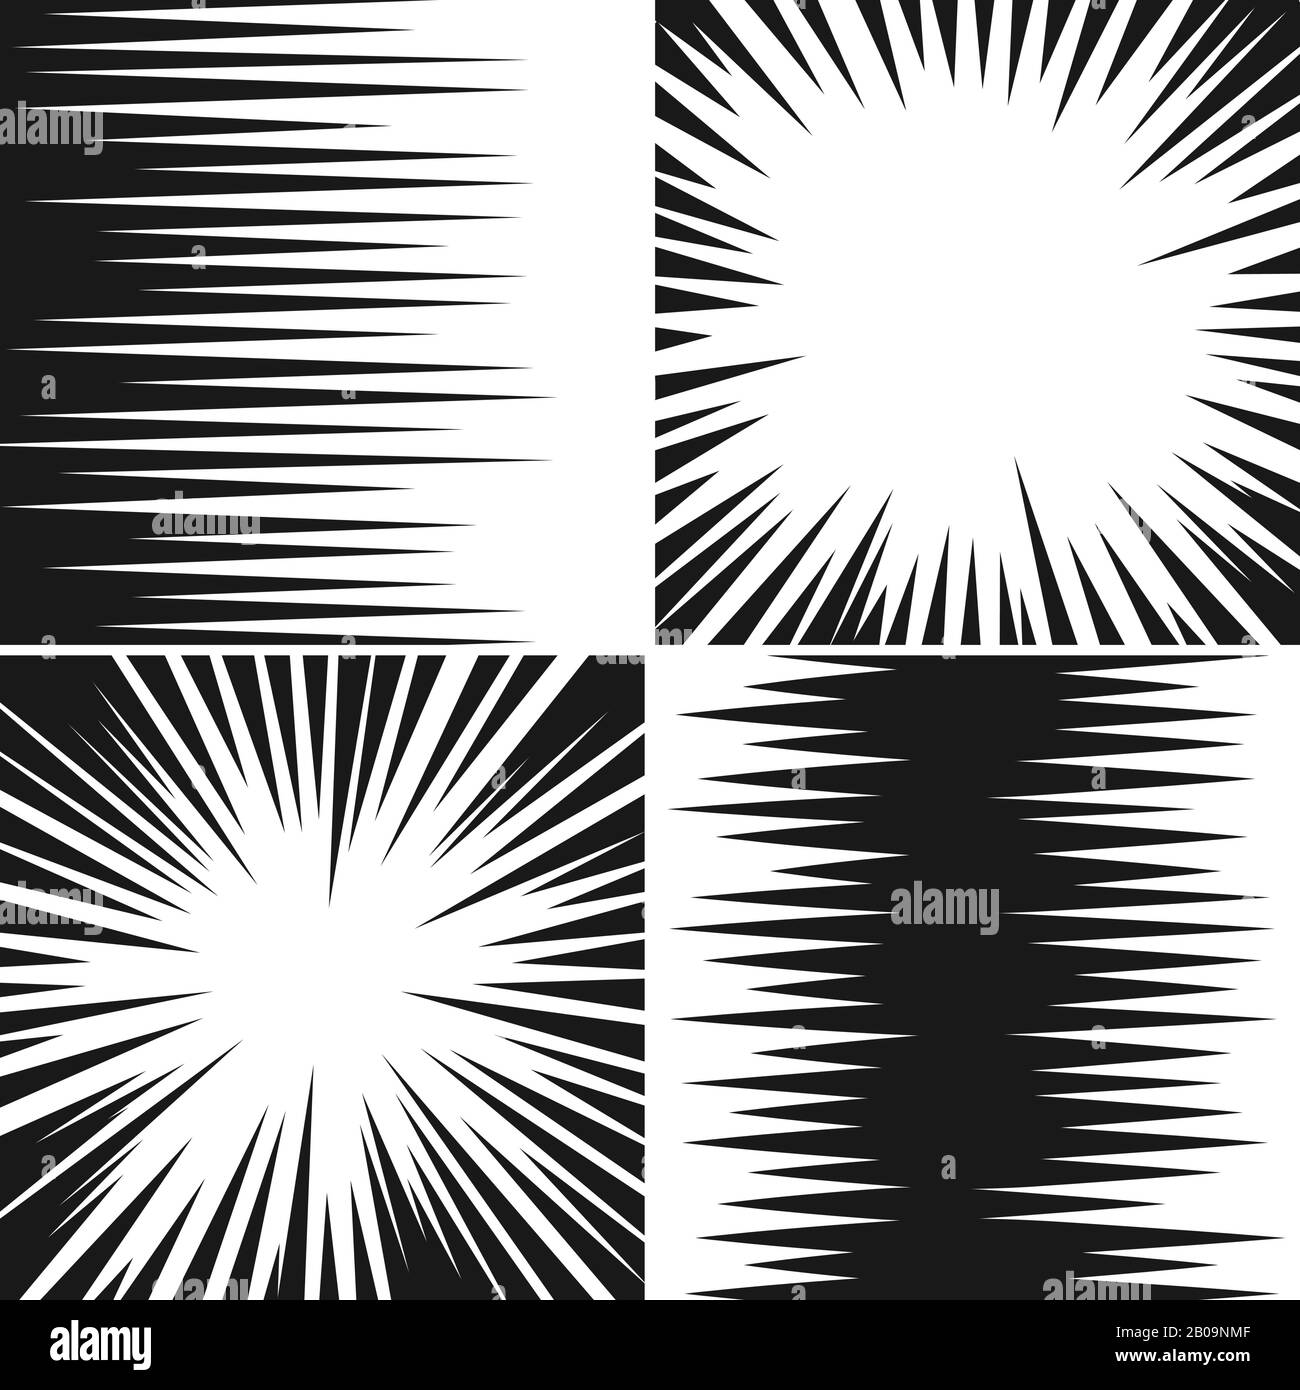 Horizontal and radial speed lines graphic manga comic drawing vector backgrounds set. Striped effect manga radial line, illustration of comic book effect explosion Stock Vector